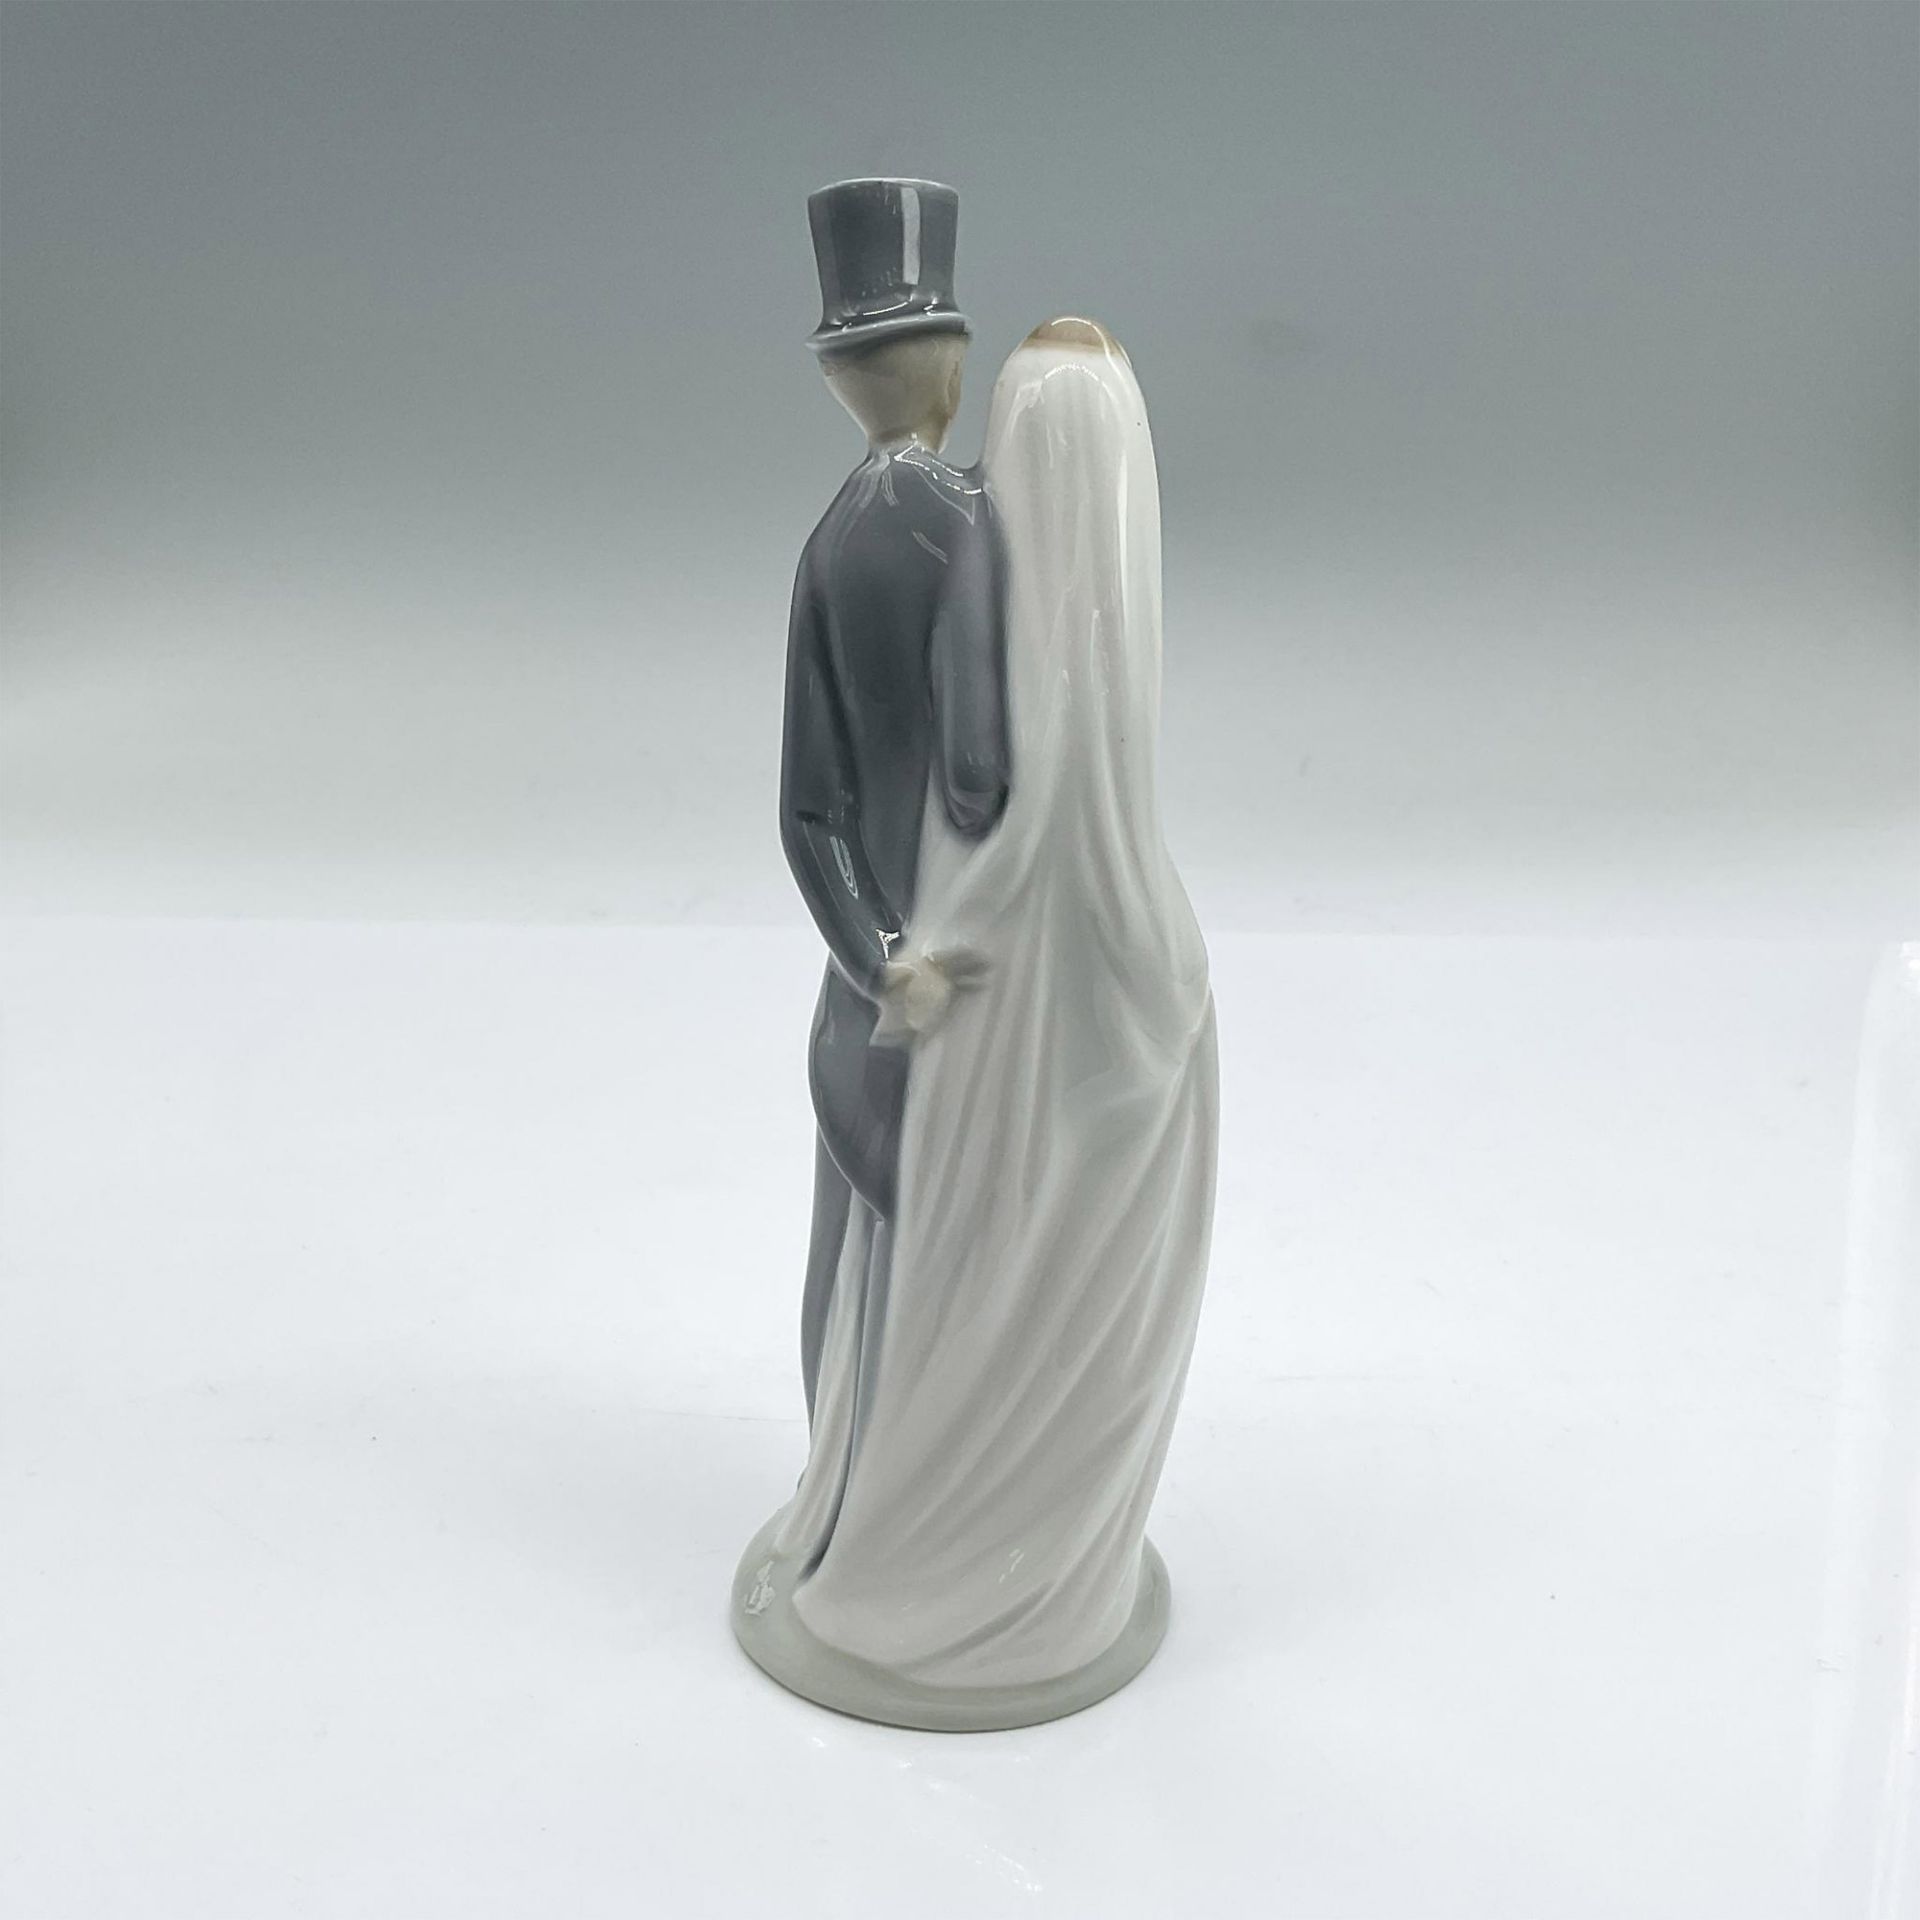 Bride And Groom Cake Topper - NAO By Lladro Figurine - Image 2 of 3